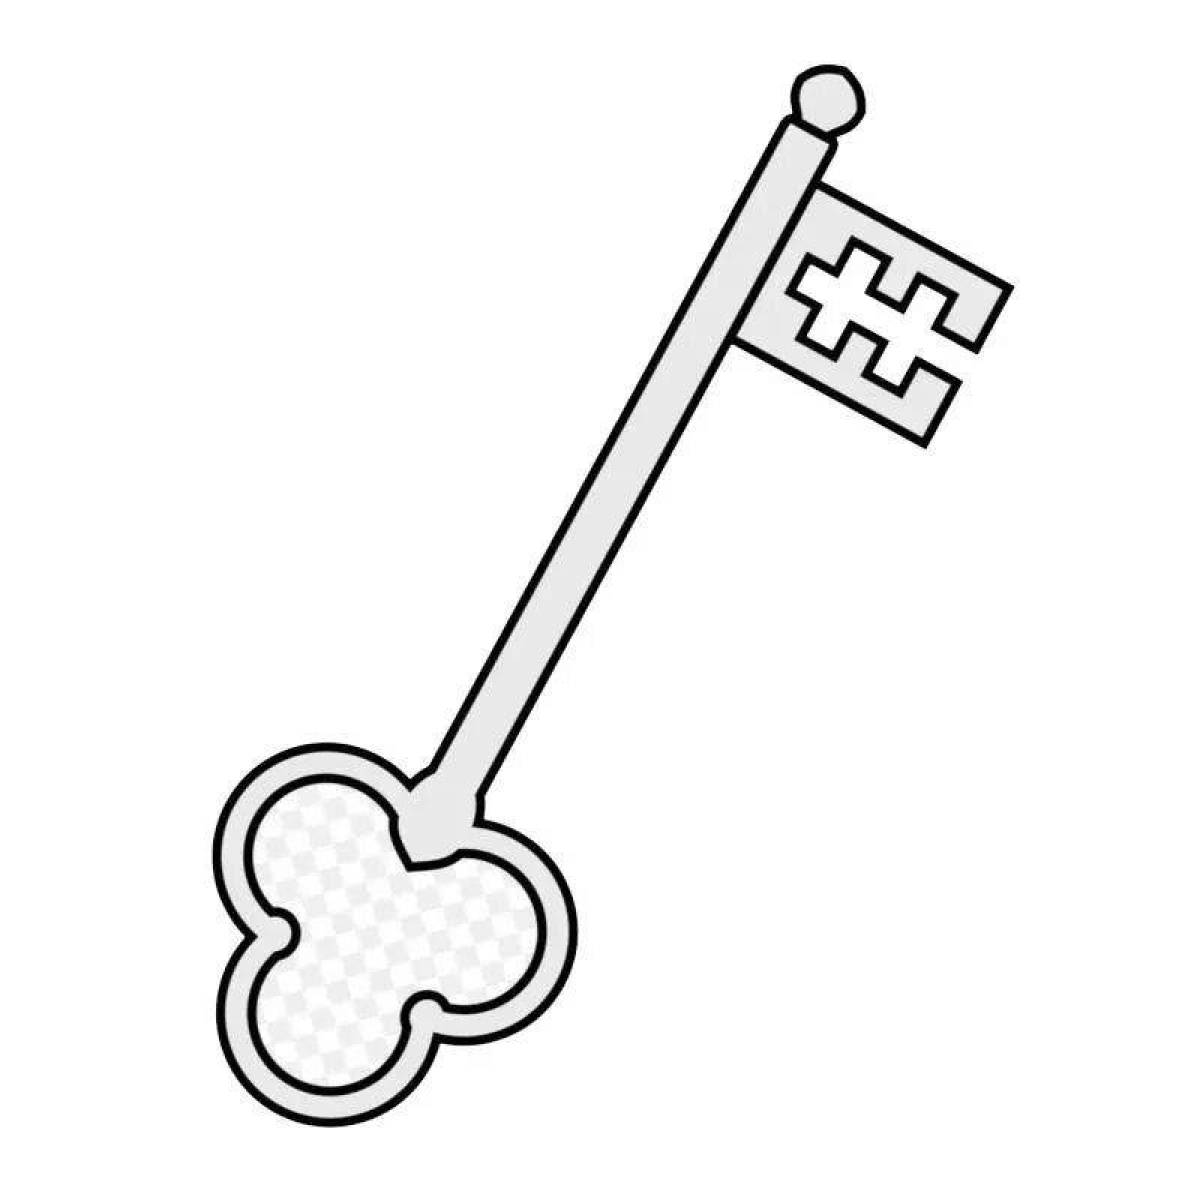 Bright Key Coloring Page